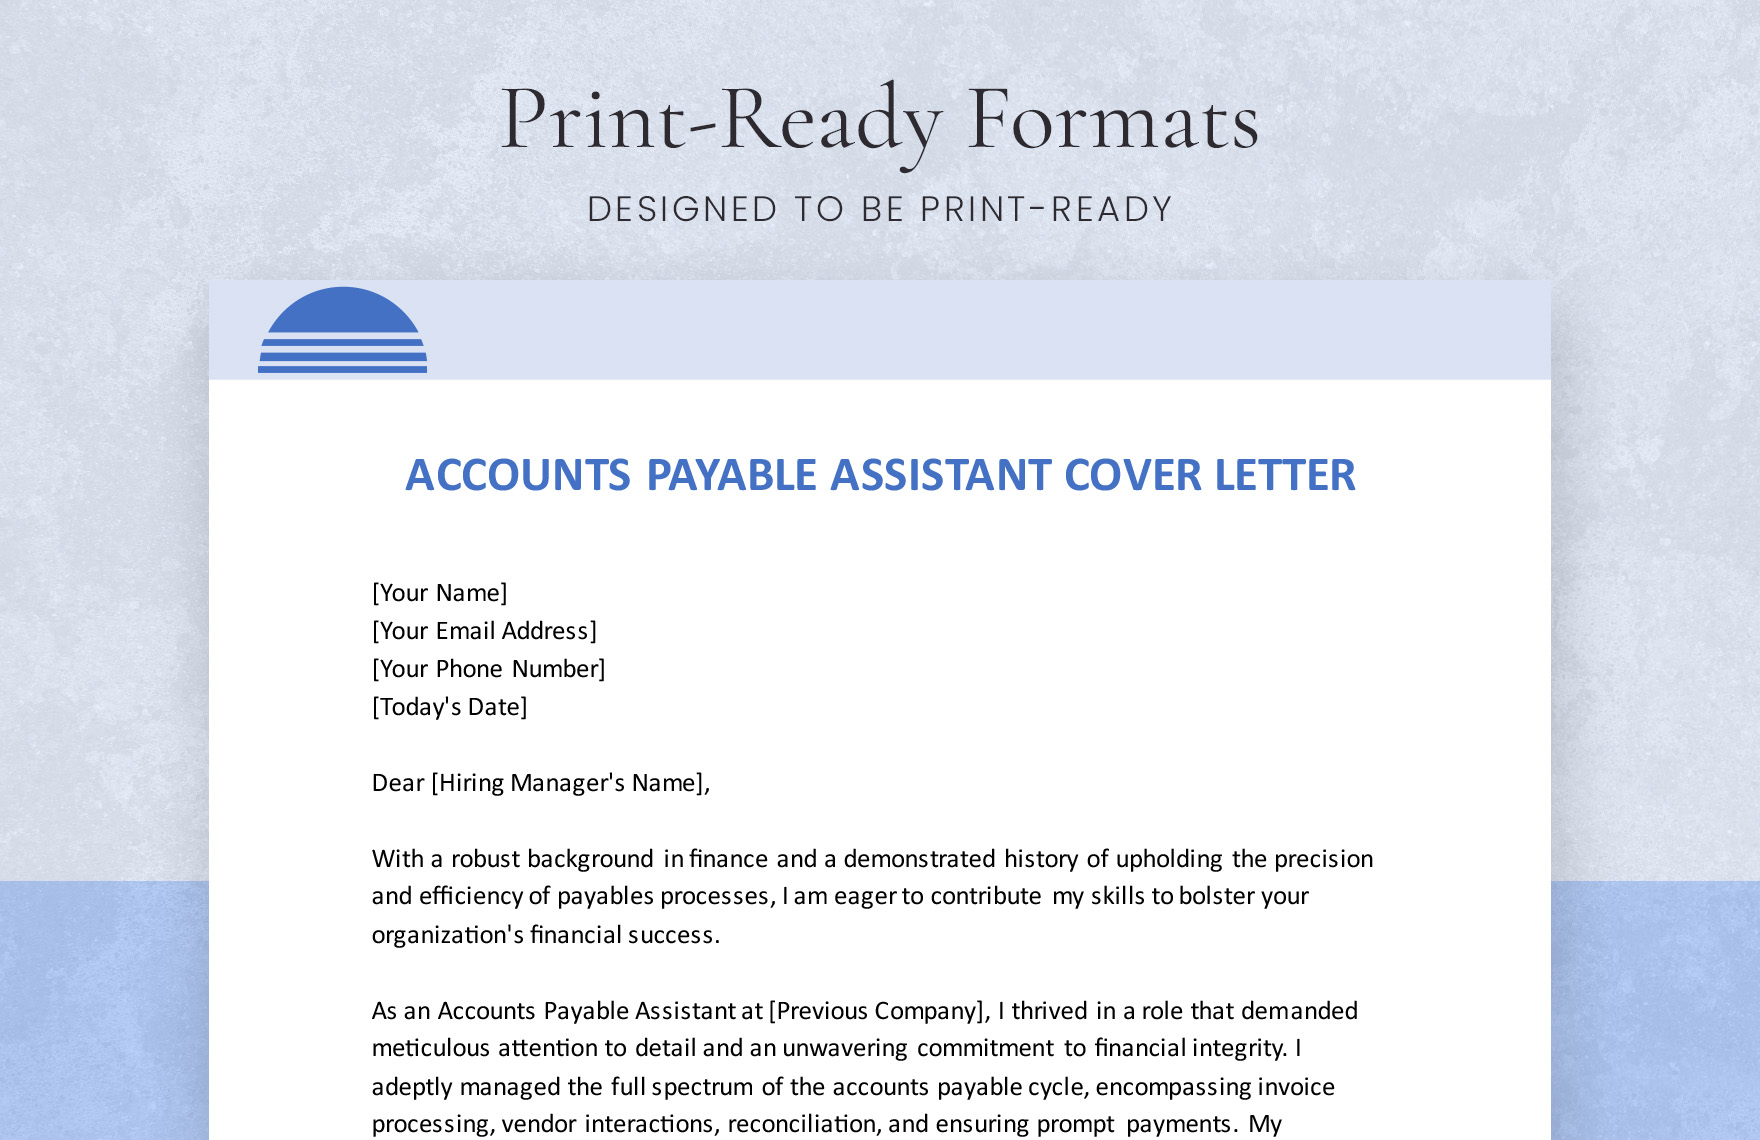 Accounts Payable Assistant Cover Letter